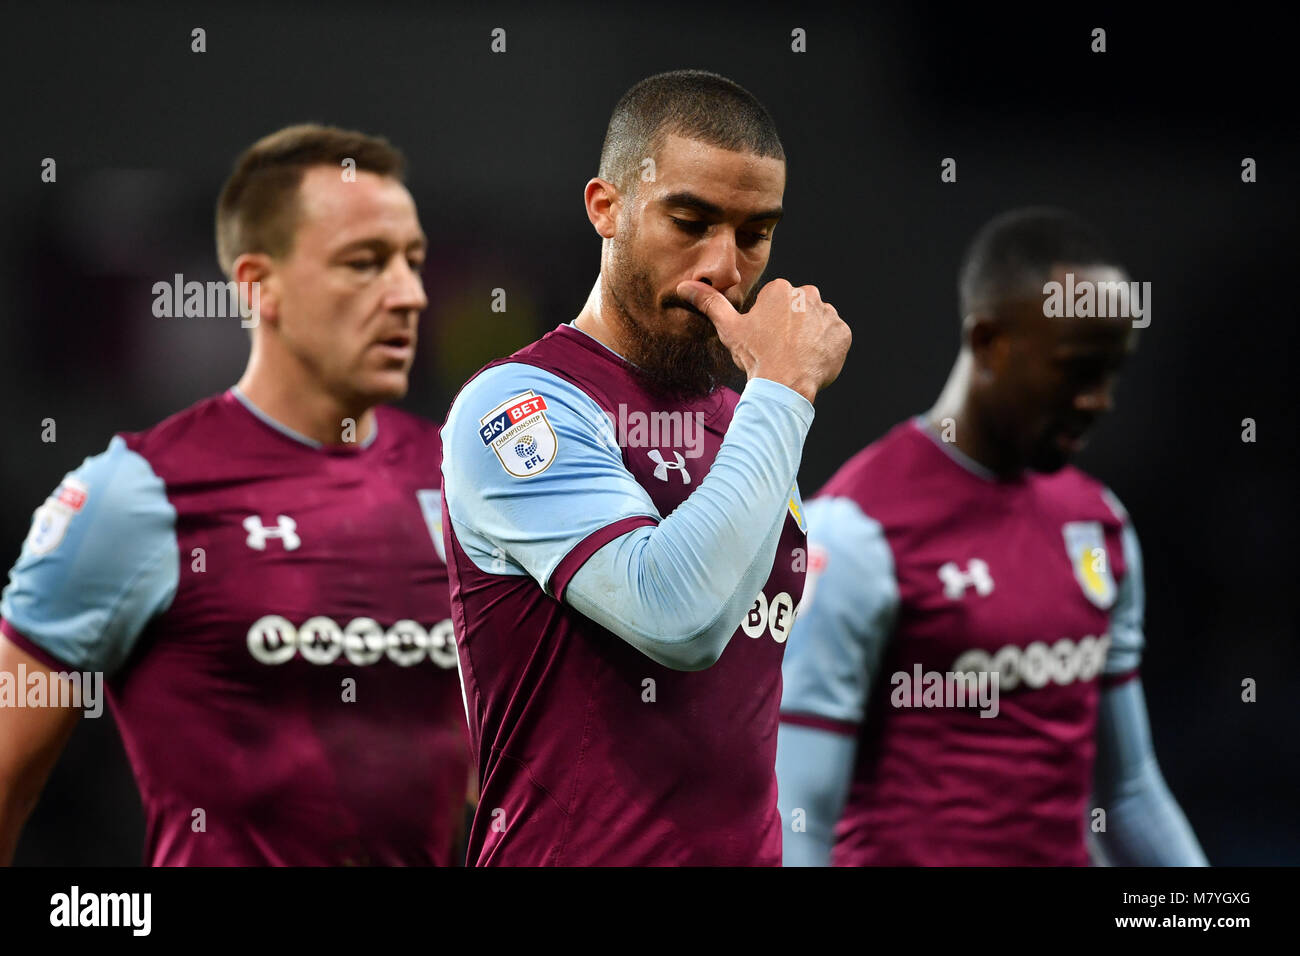 Aston Villa's (left to right) John Terry, Lewis Grabban and Albert Adomah leave the field dejected at halftime during the Sky Bet Championship match at Villa Park, Birmingham. Stock Photo